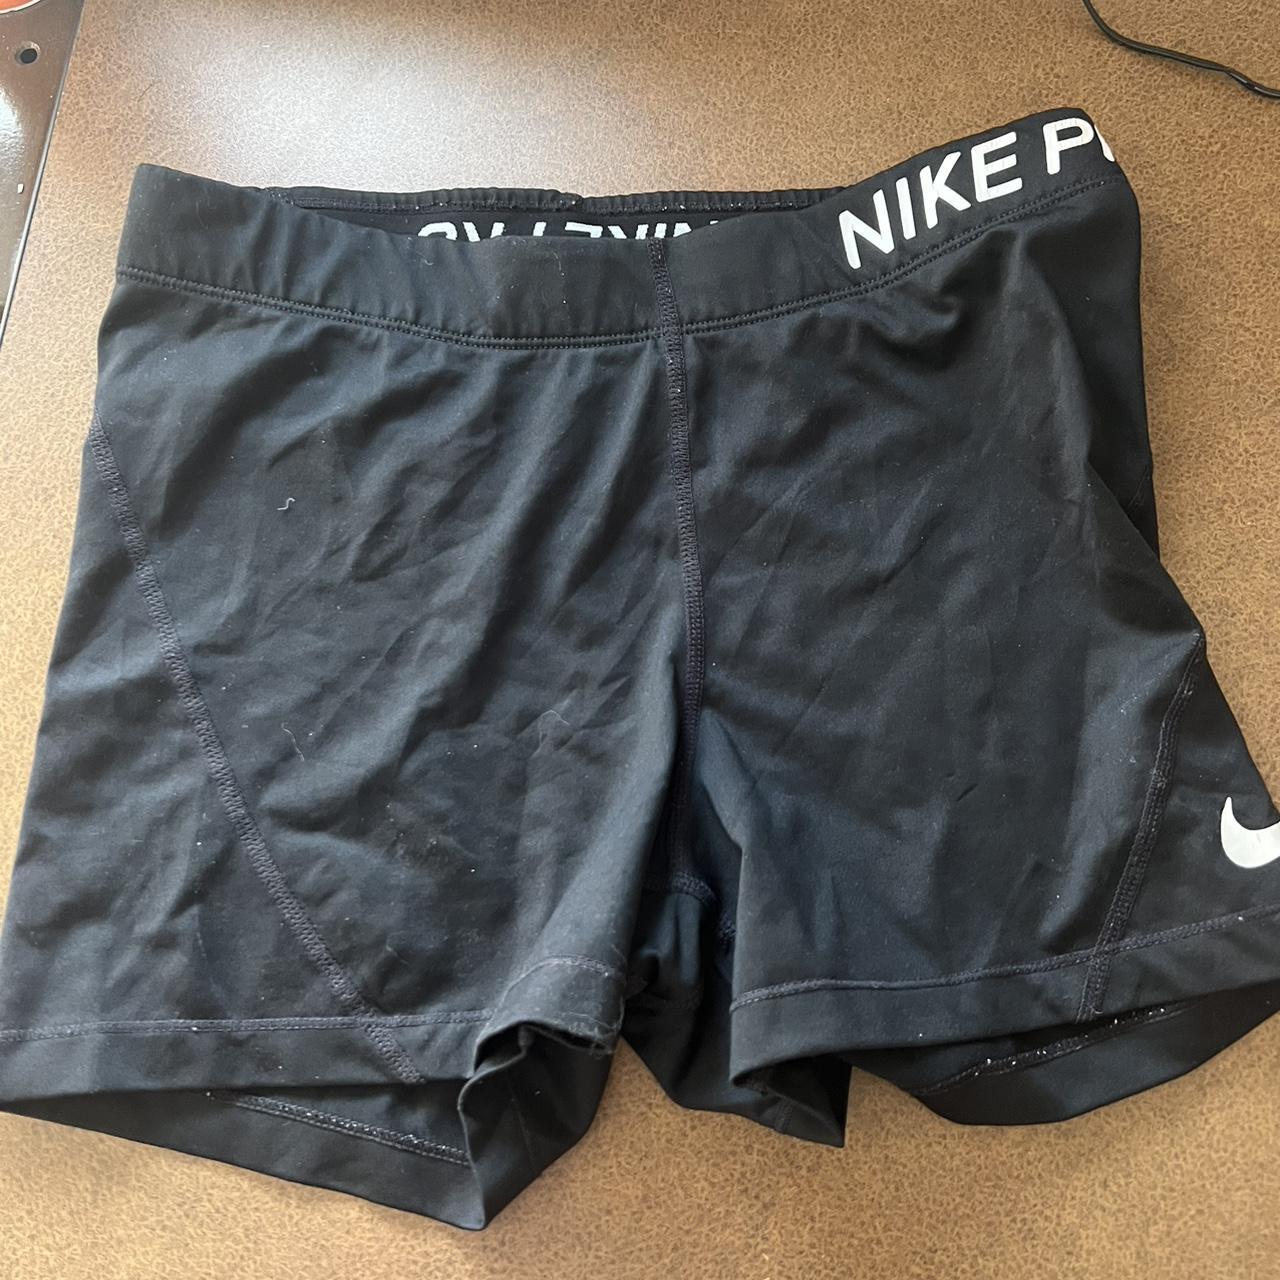 Nike pro shorts Good condition, shown in pics #nike... - Depop